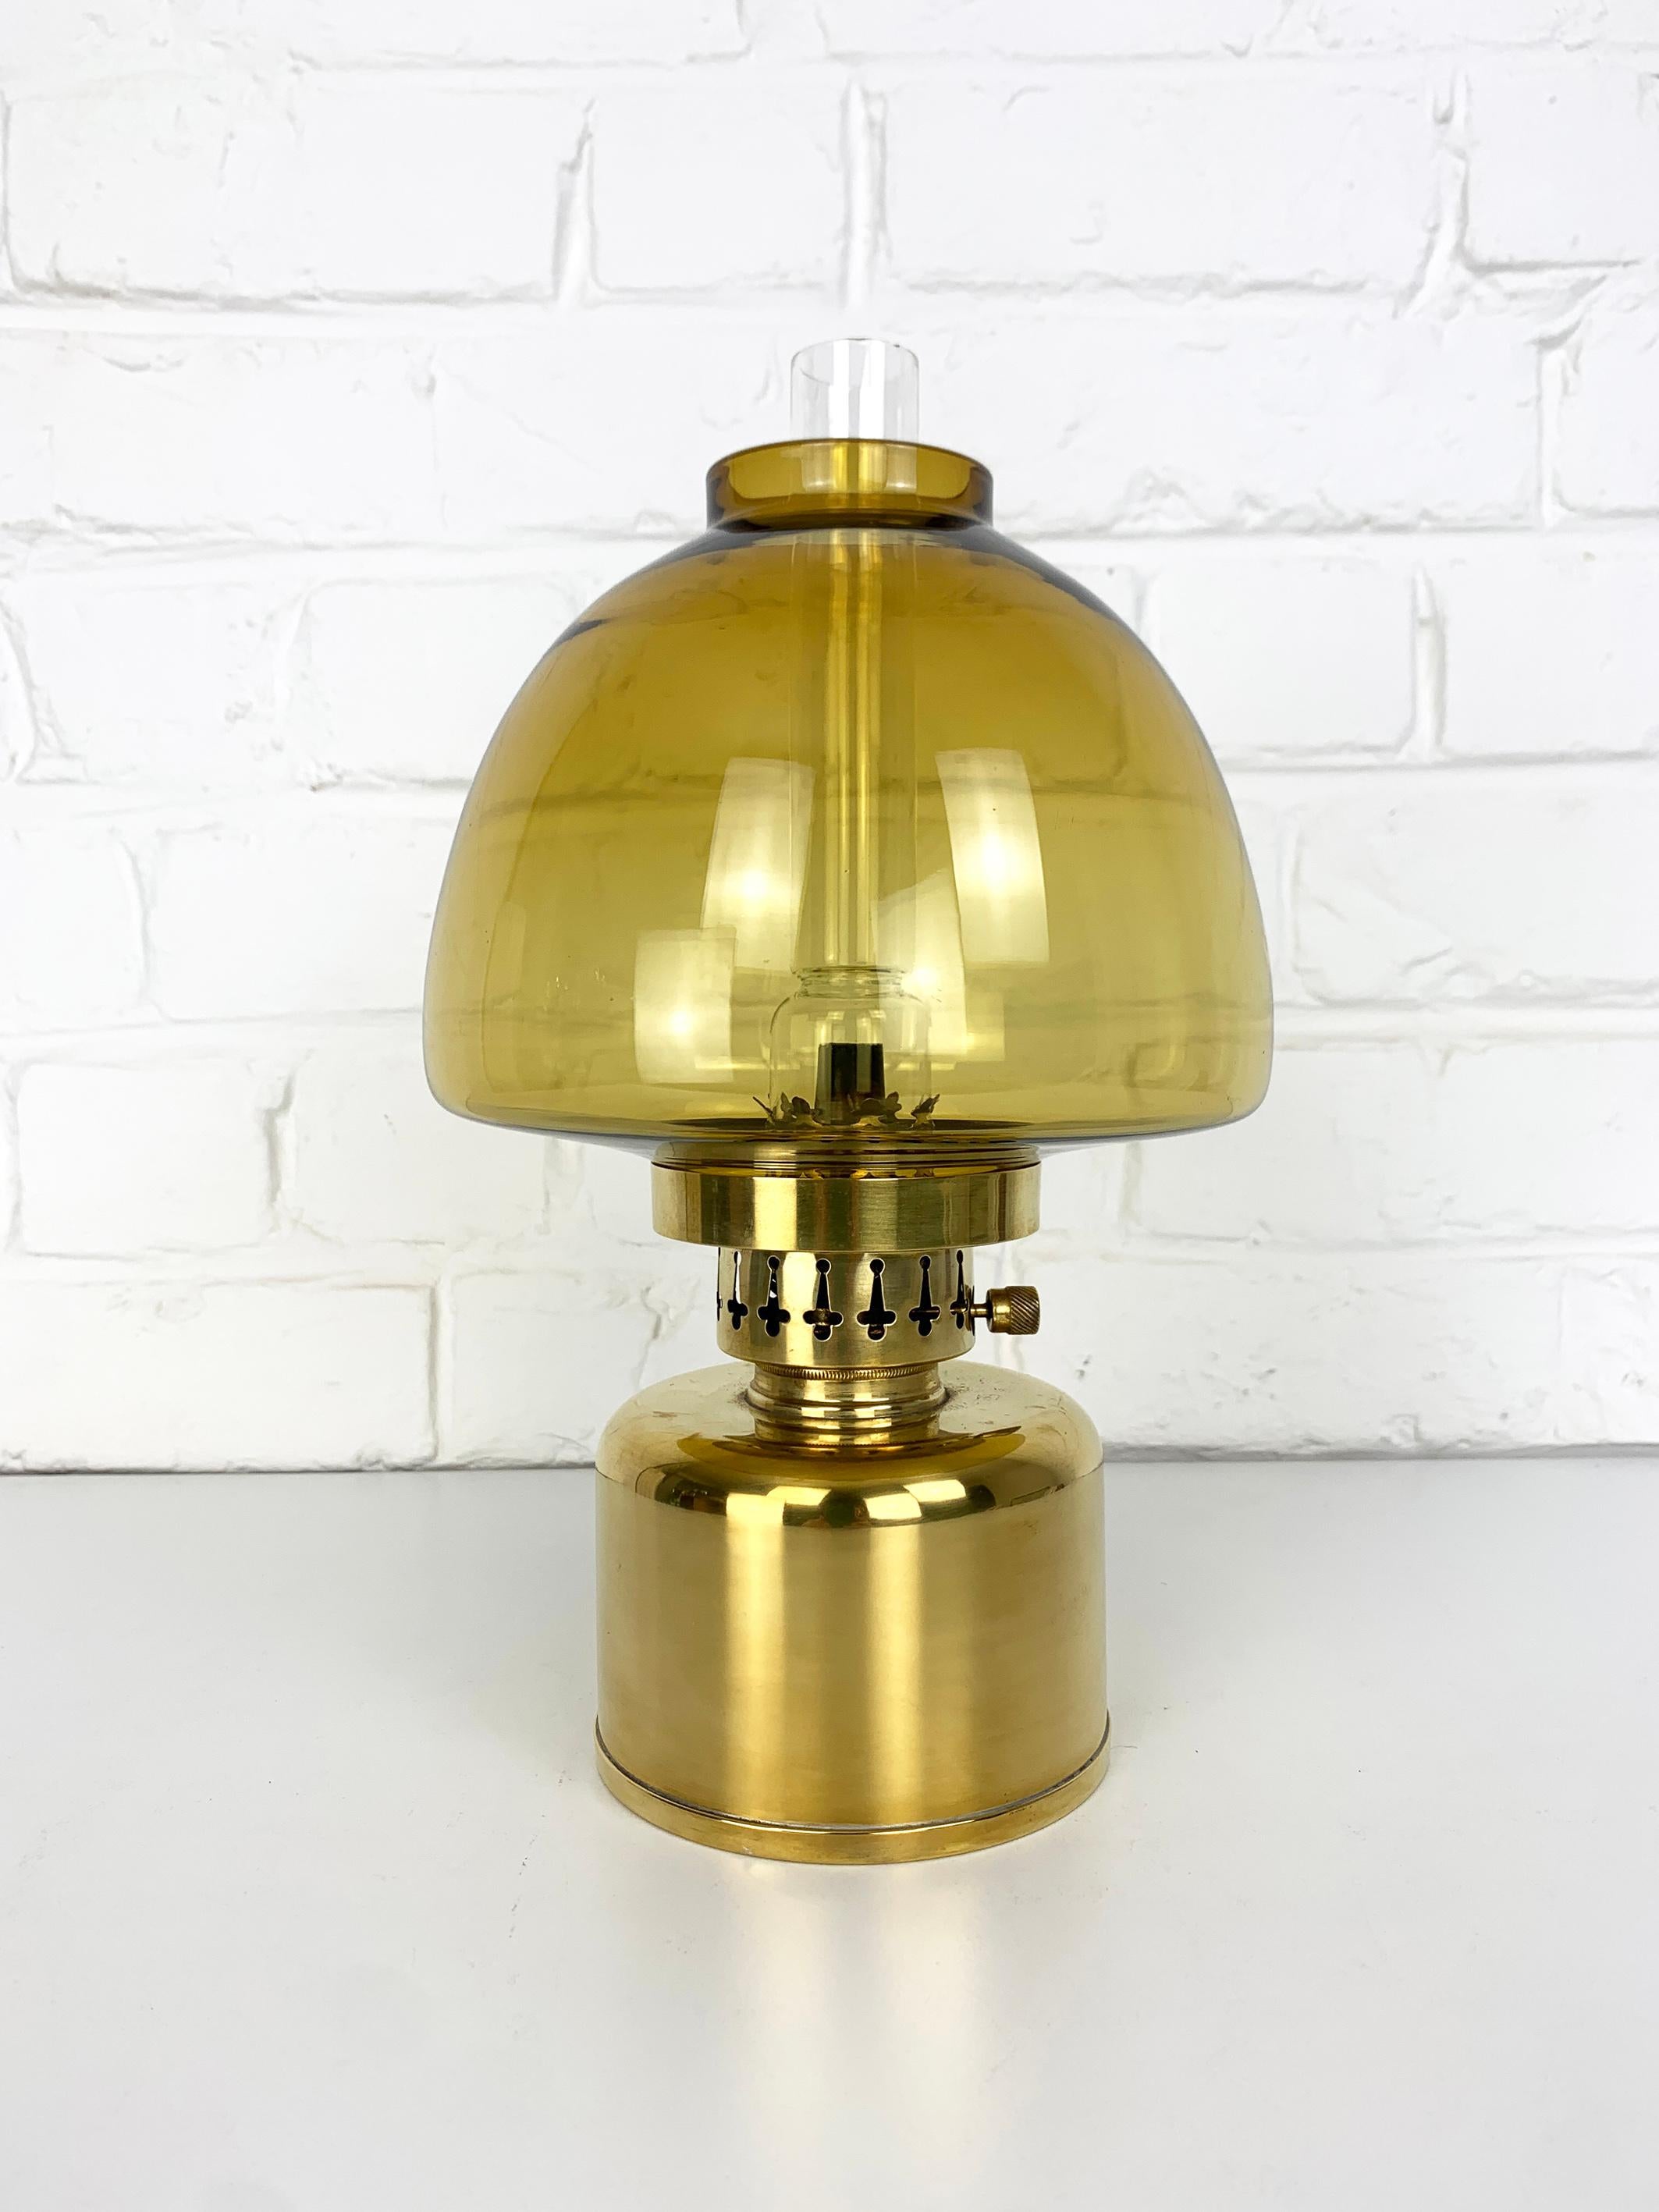 Scandinavian L/101 Oil- or Petroleum Light in brass.

A nice example of Jakobsson's L-101 Model Oil Lamp with its original dark yellow/ochre glass shade. The manufacturer's sticker is present under the brass tank.

Design by Hans-Agne